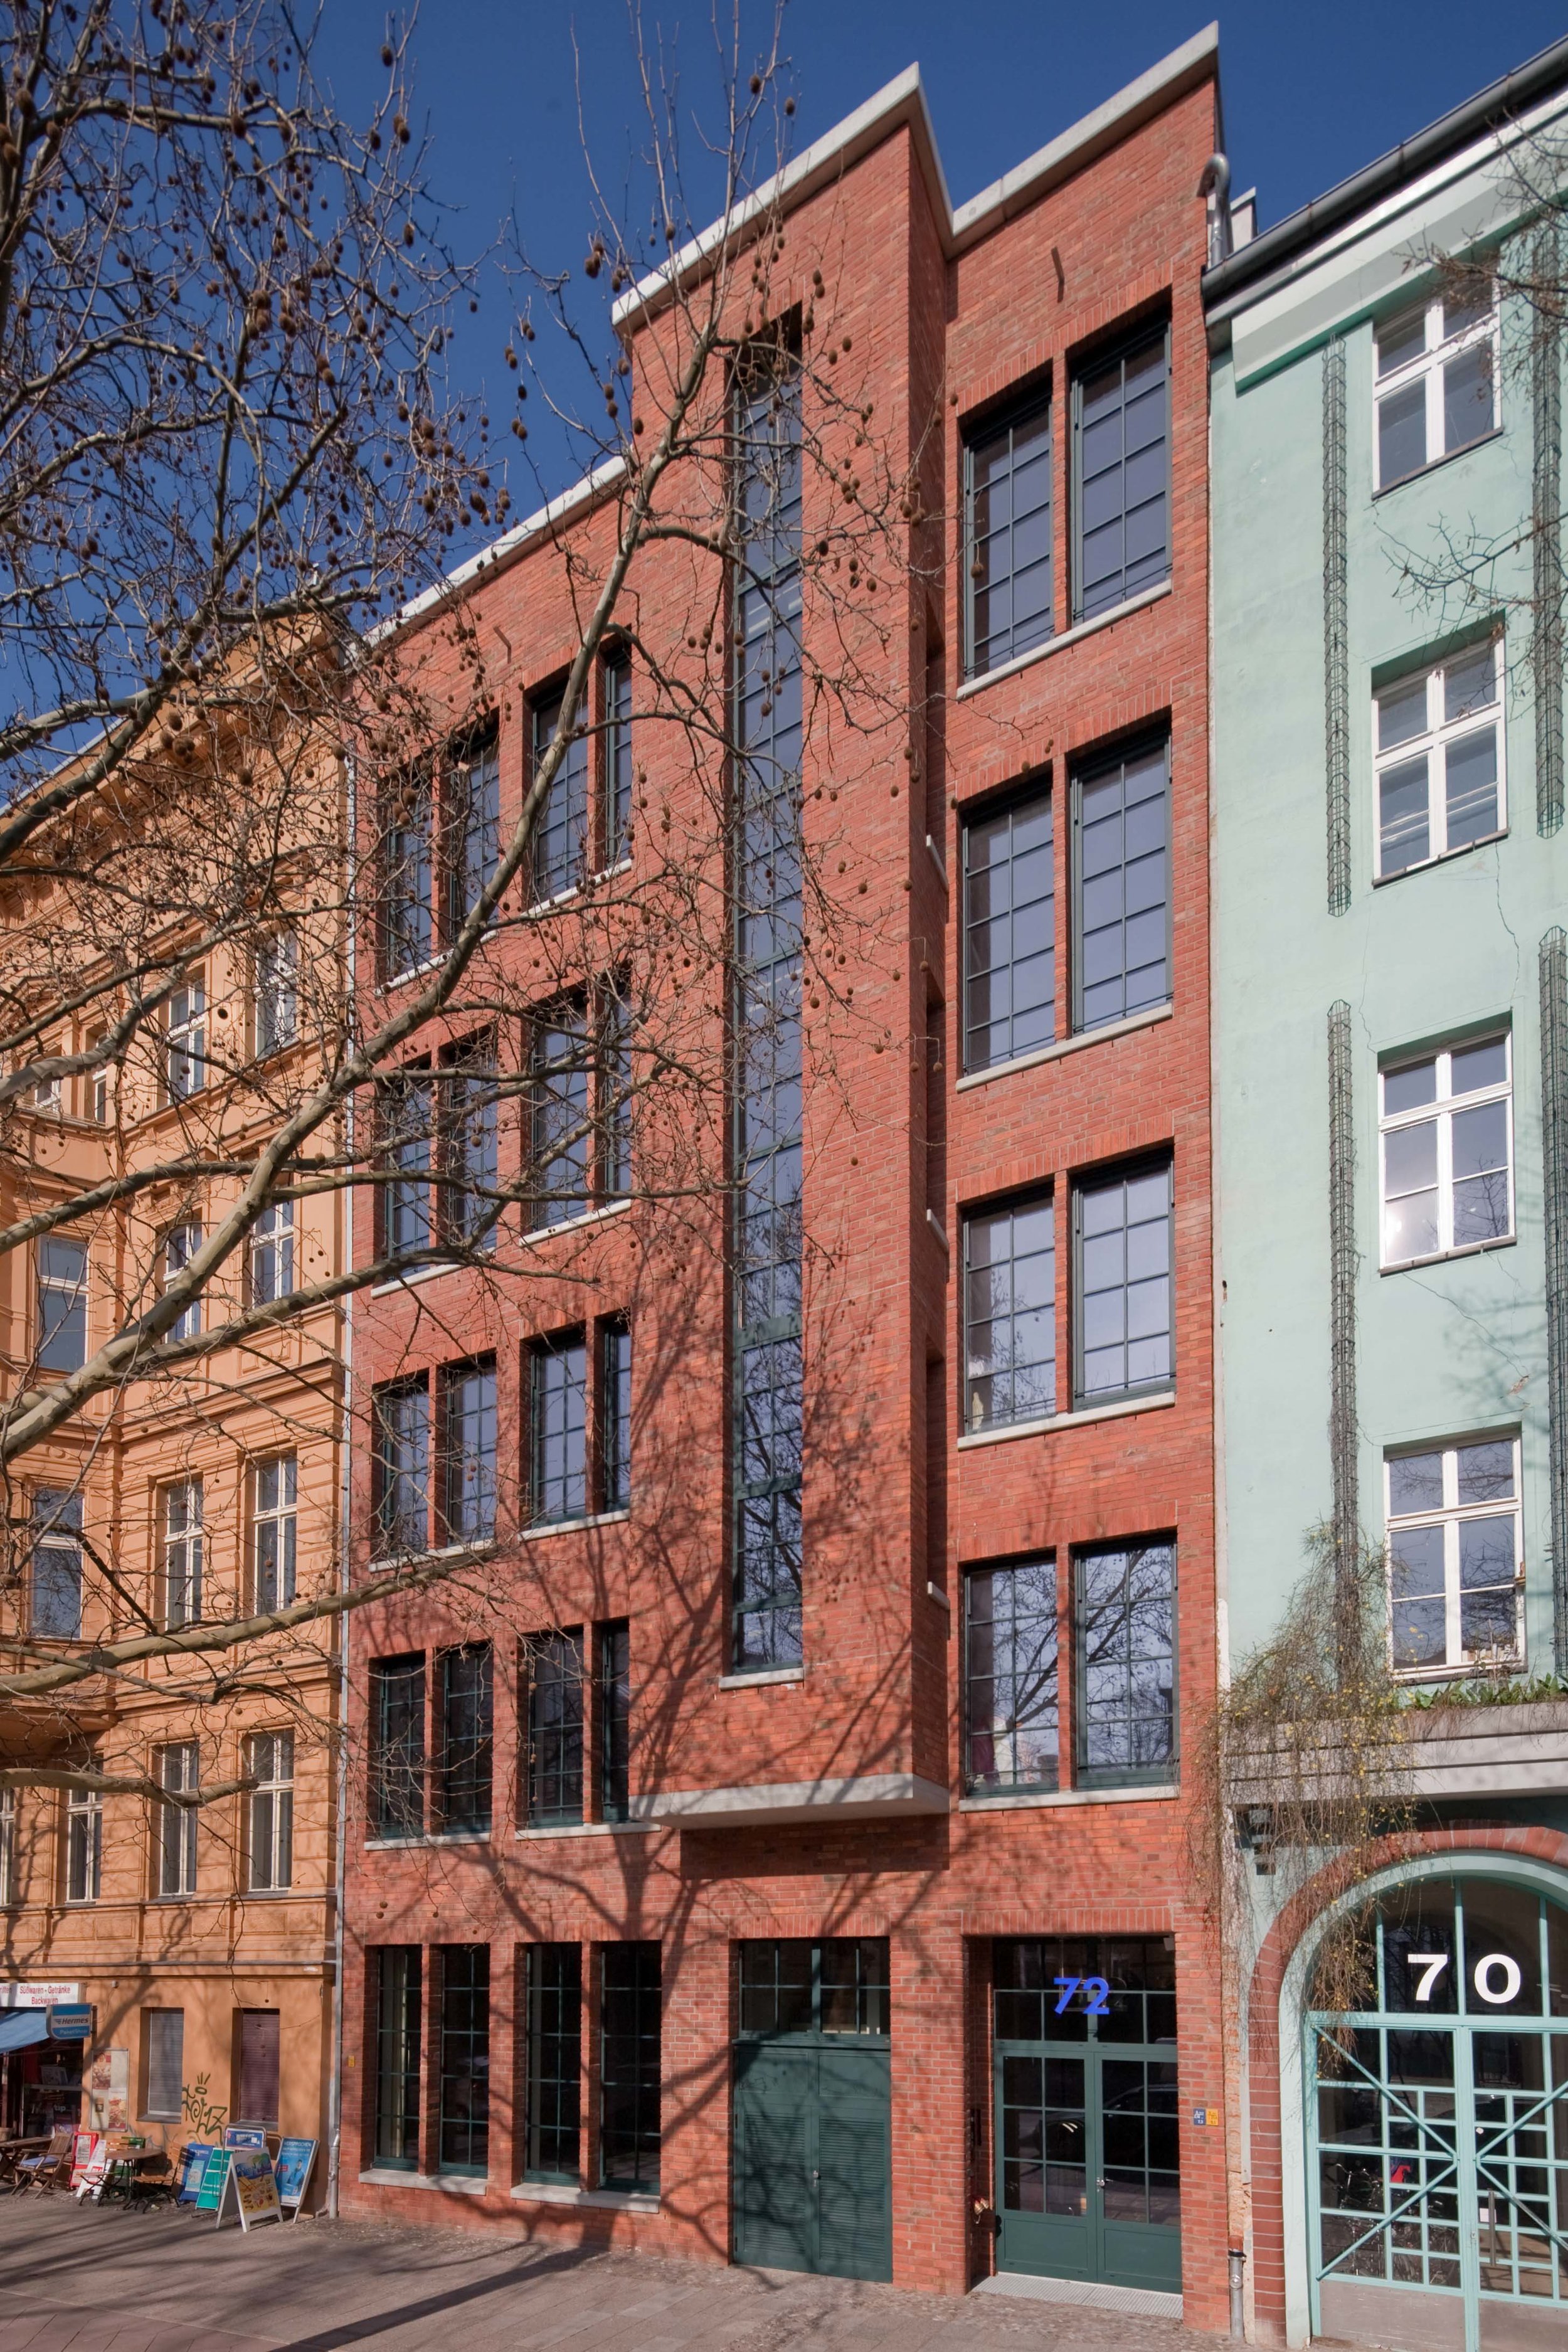 Private apartmenthouse, Berlin,